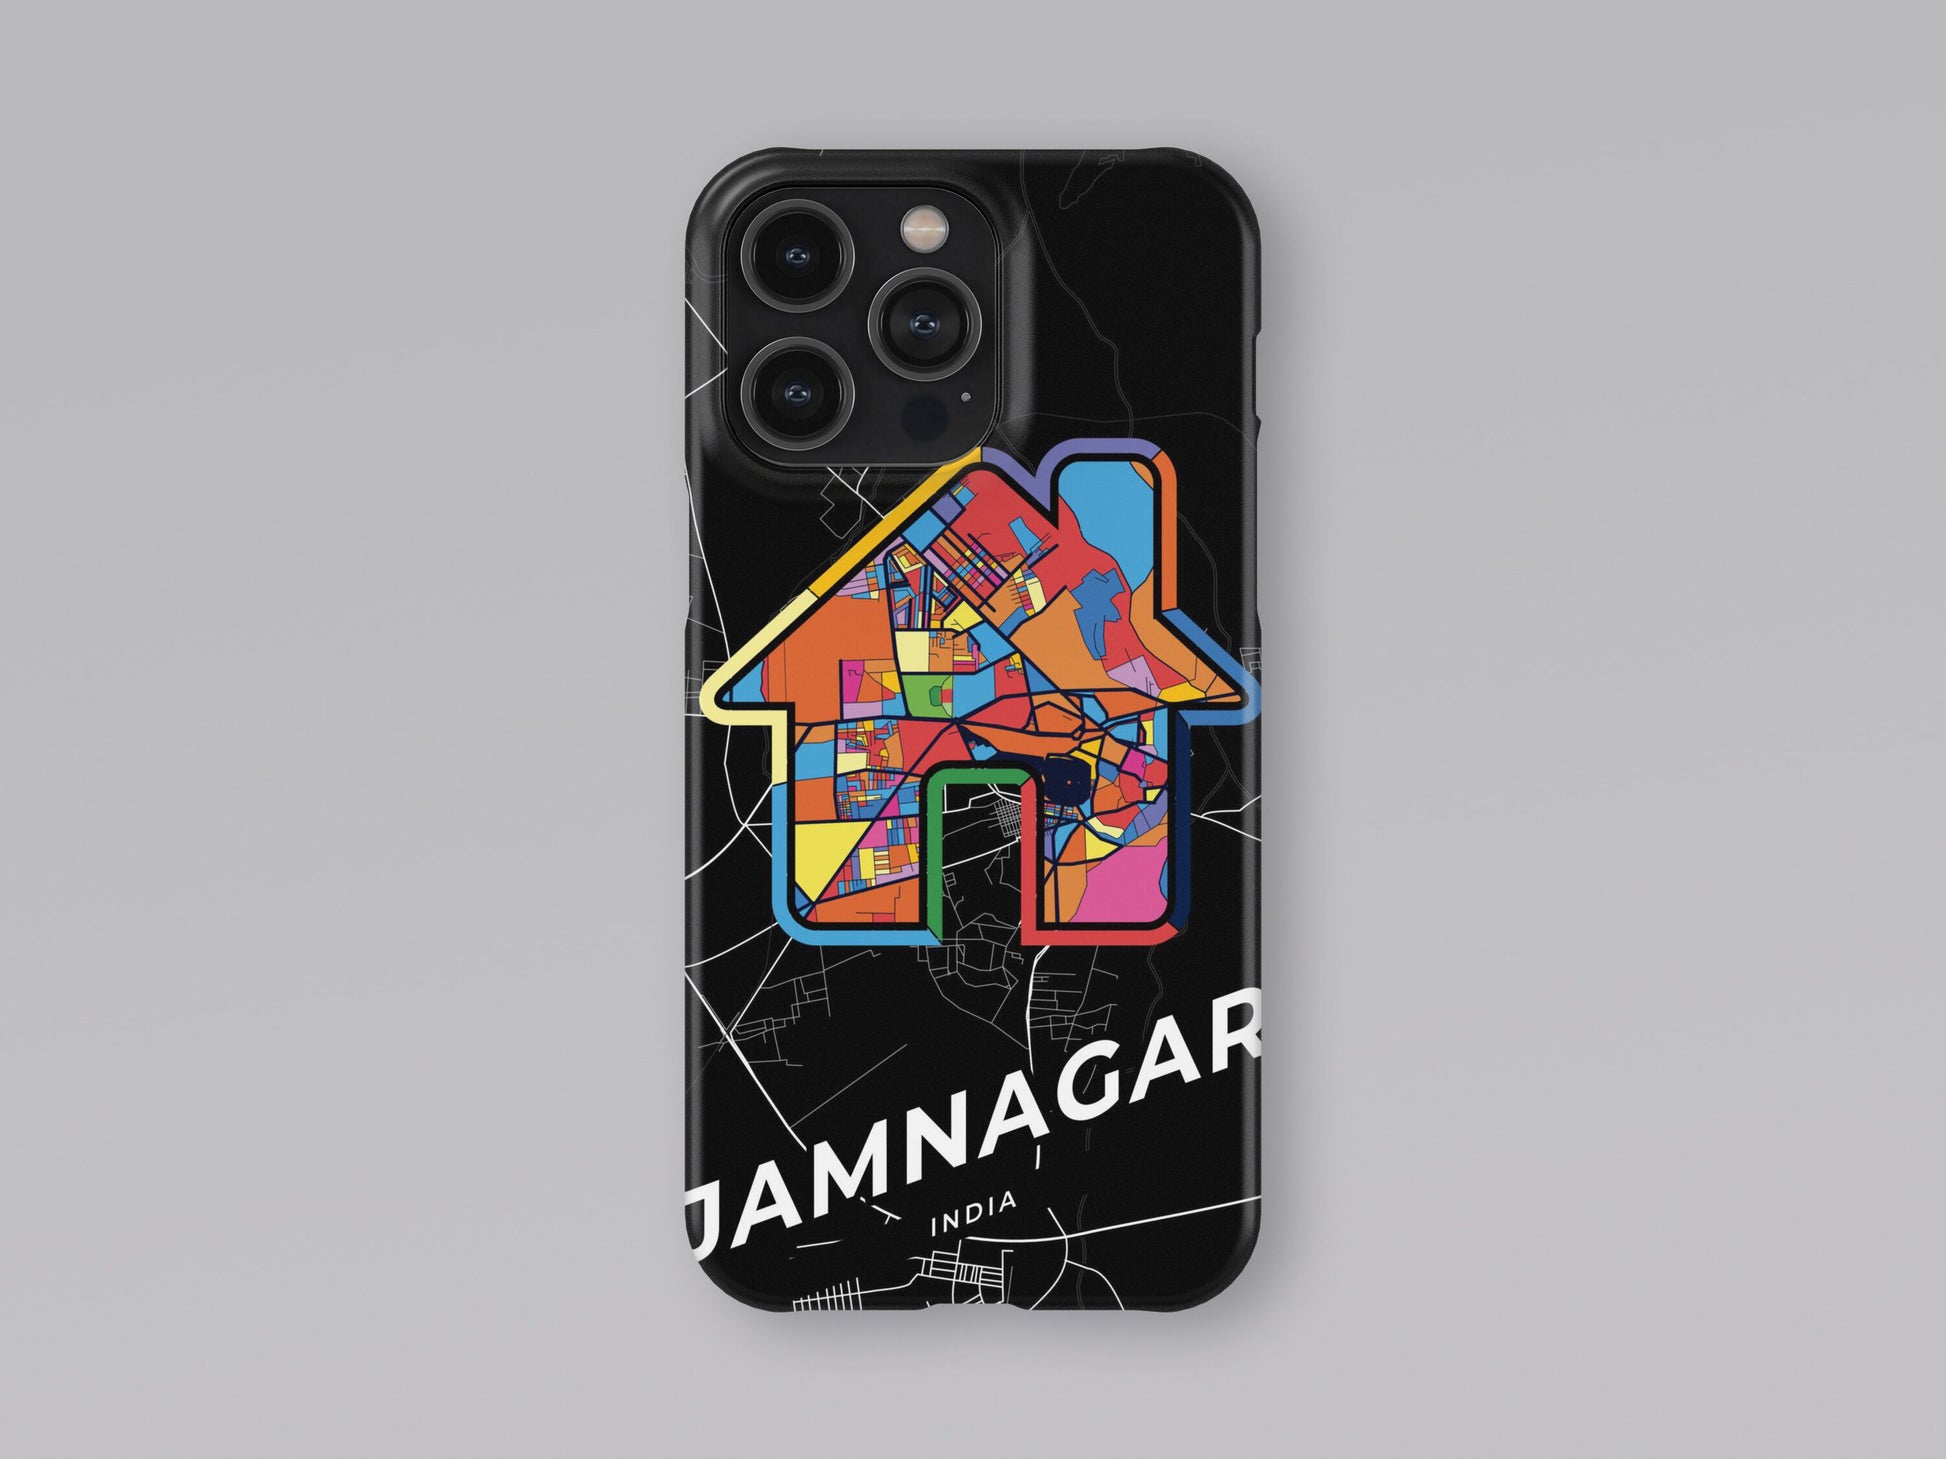 Jamnagar India slim phone case with colorful icon. Birthday, wedding or housewarming gift. Couple match cases. 3